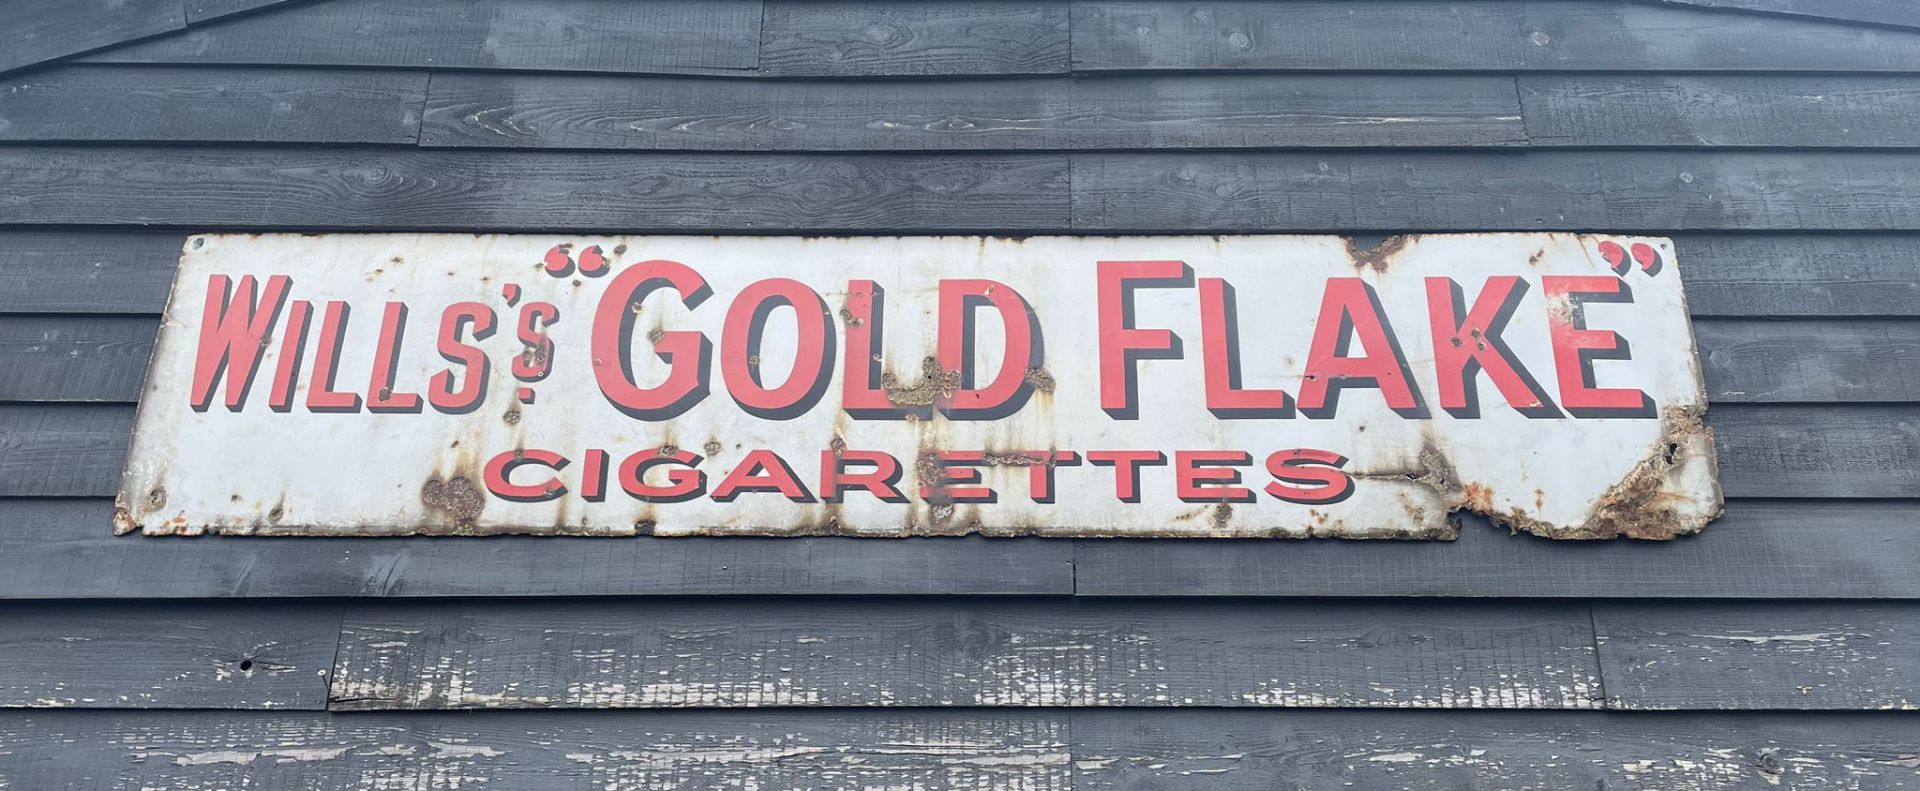 wills Gold Flake Cigarettes Sign - Image 2 of 5